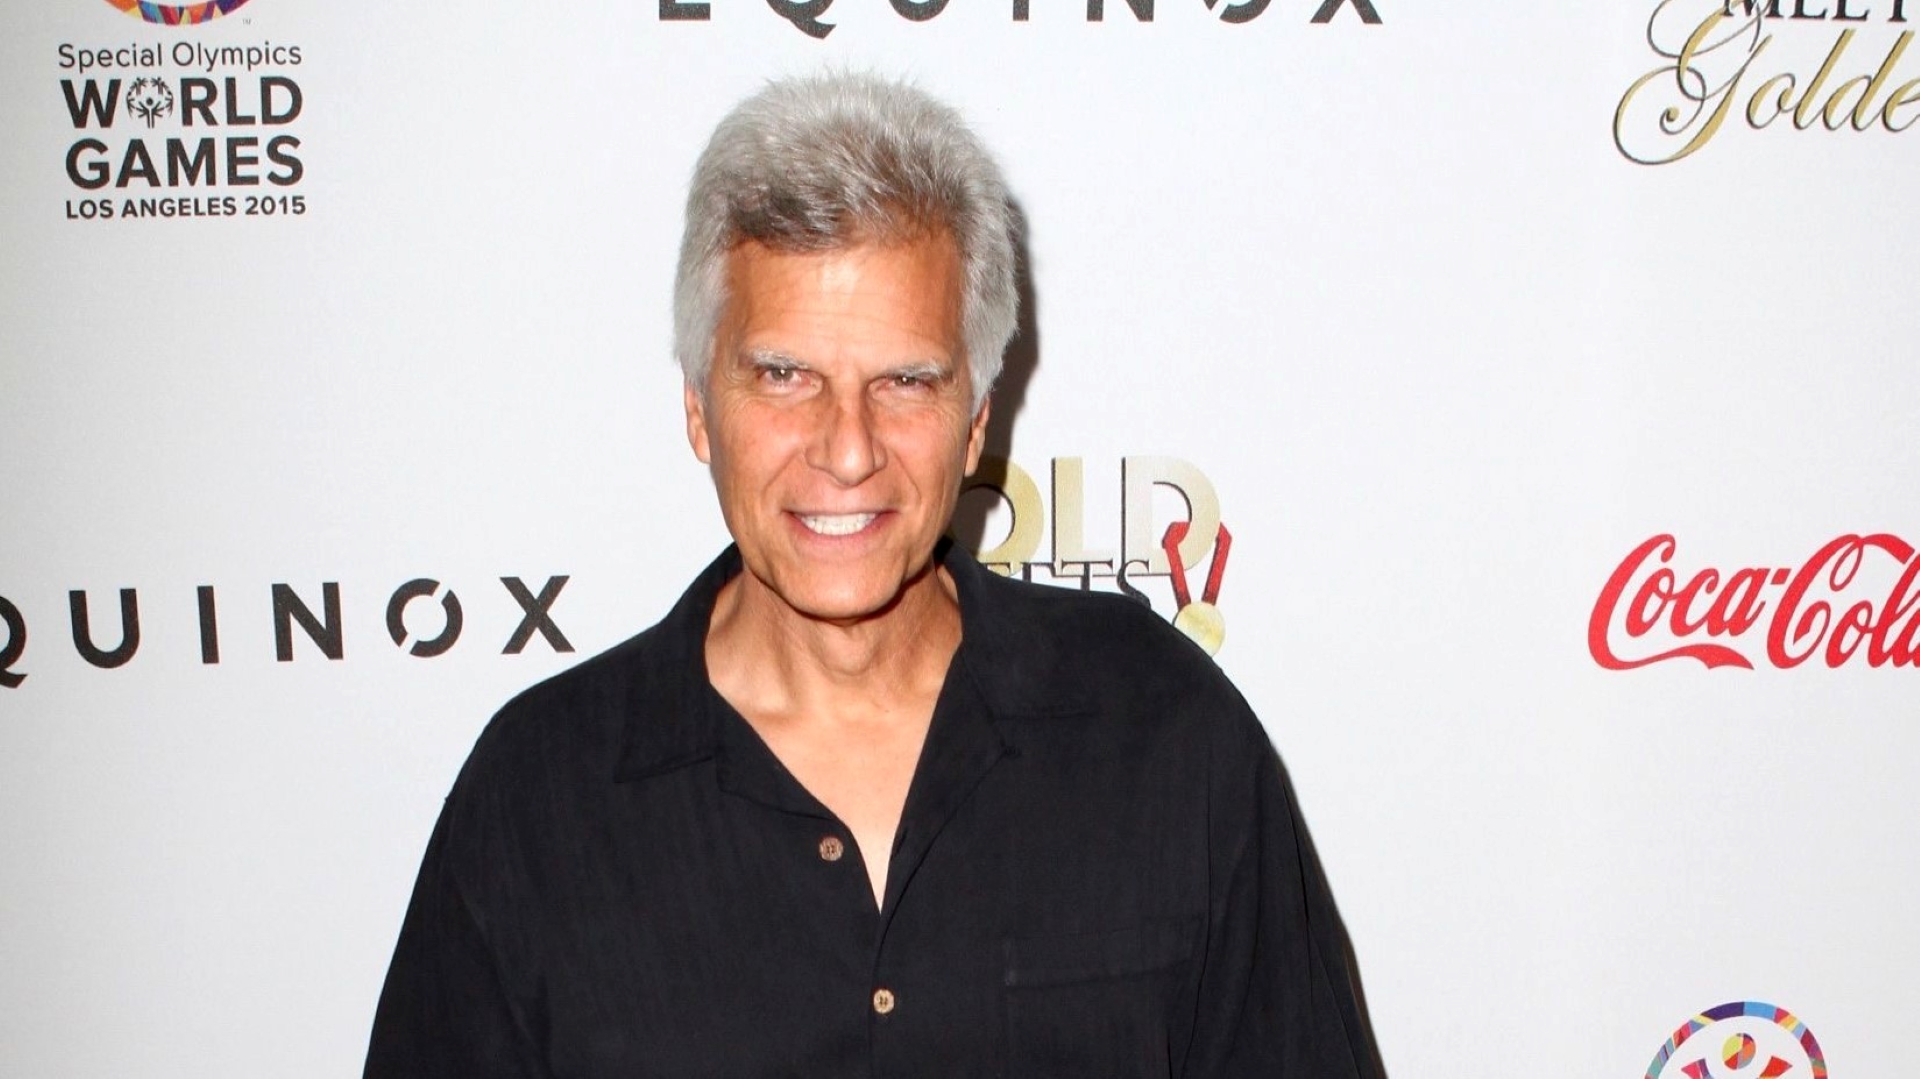 Mark Spitz Net Worth - How One Of The Greatest Swimmers Of All Time Built His Fortune